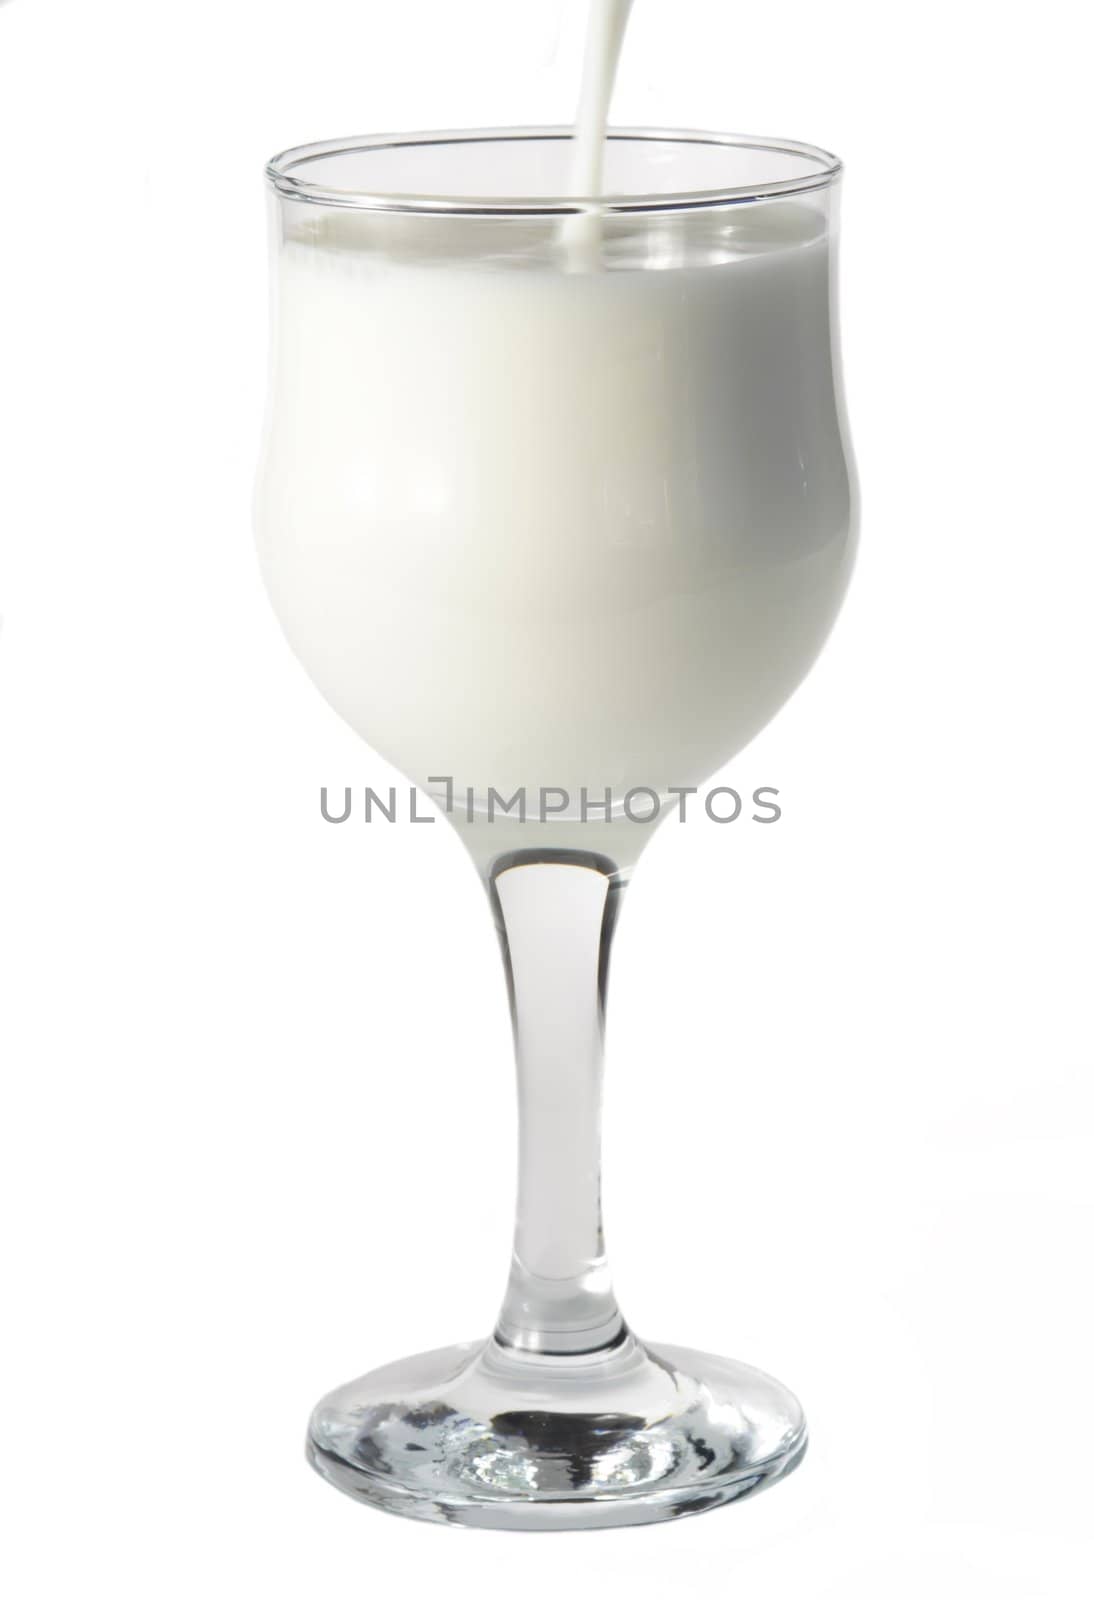 pouring some fresh milk in a wine glass, isolated on white